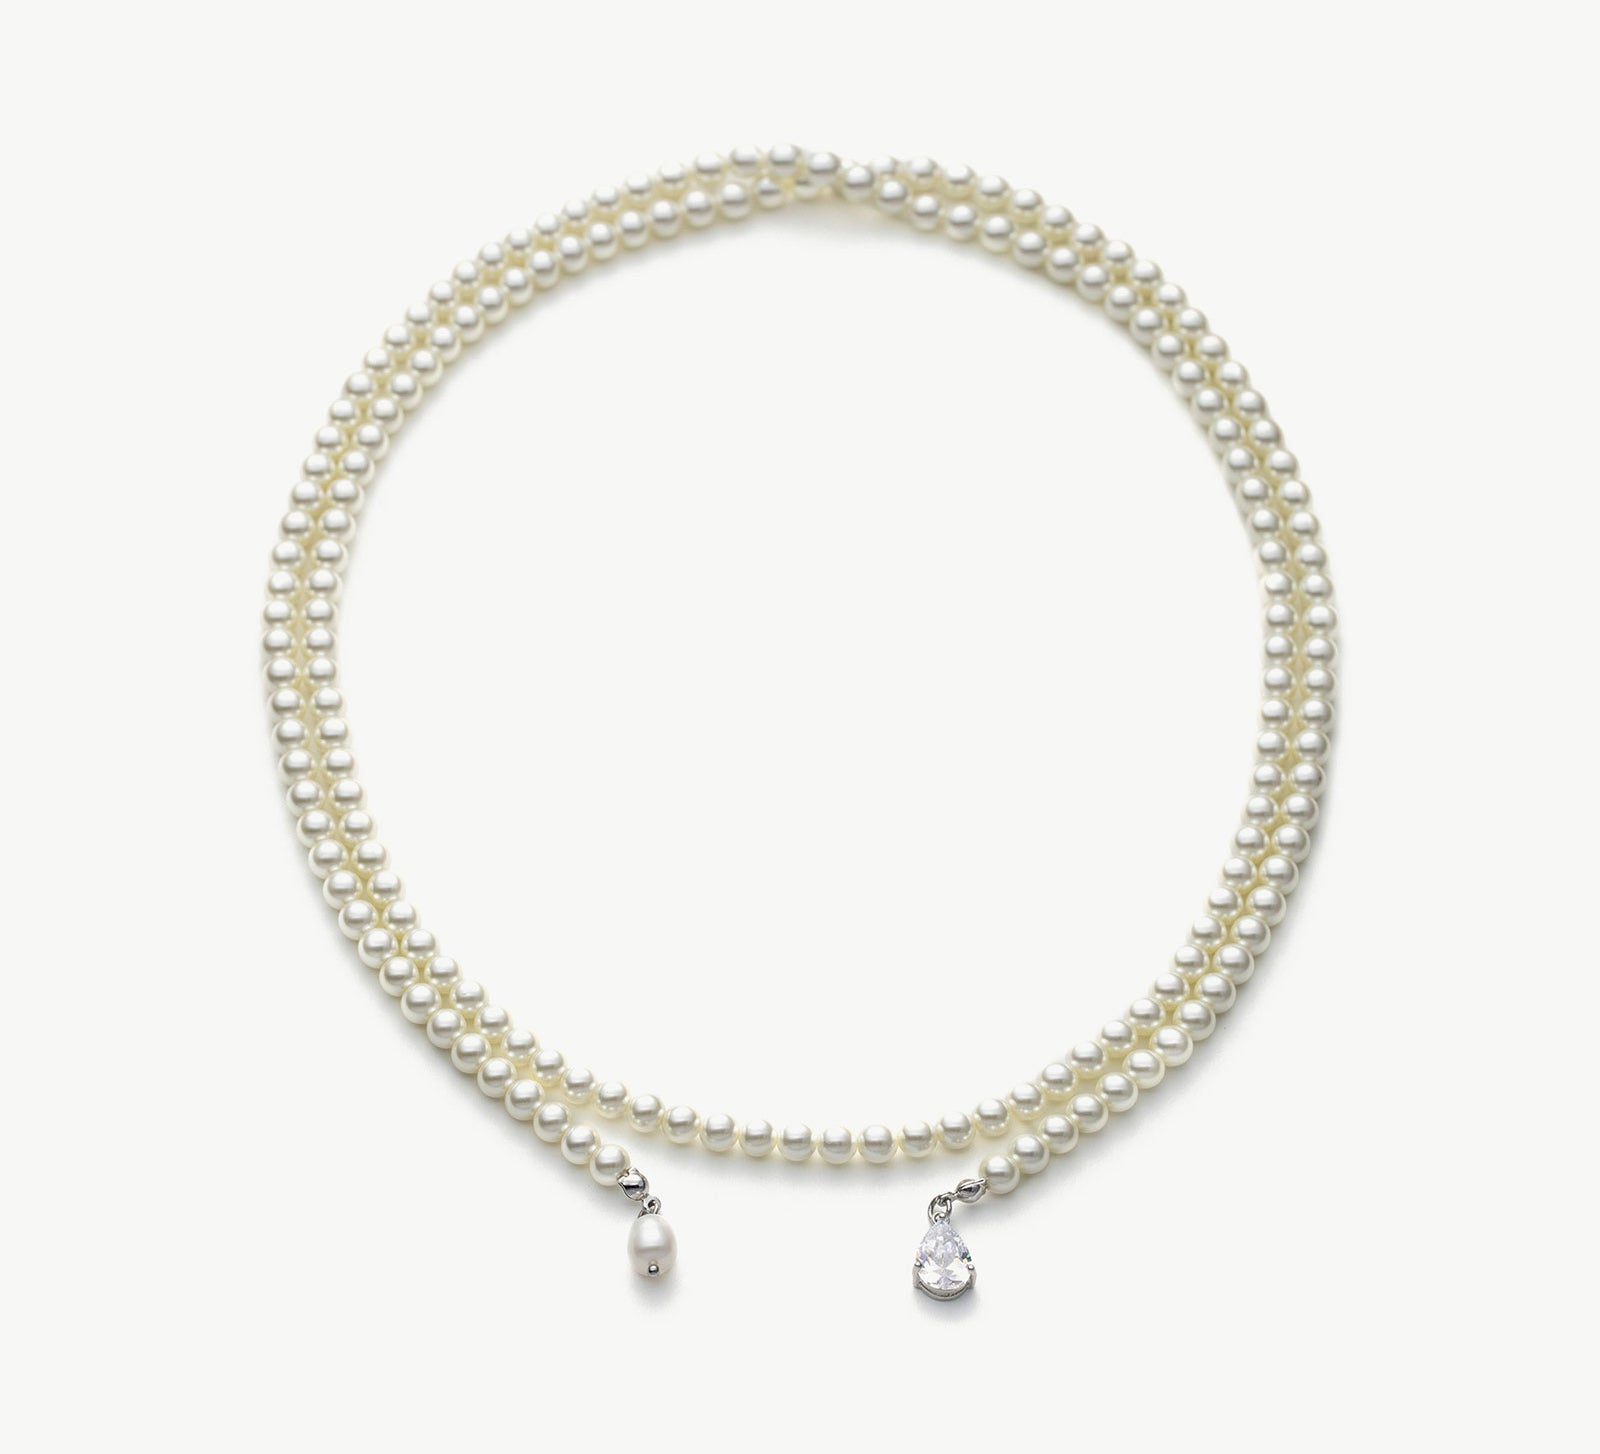 Long Pearl Necklace, an effortlessly elegant piece featuring a strand of lustrous pearls that delicately drape for a timeless and sophisticated look, perfect for adding a touch of class to any outfit.